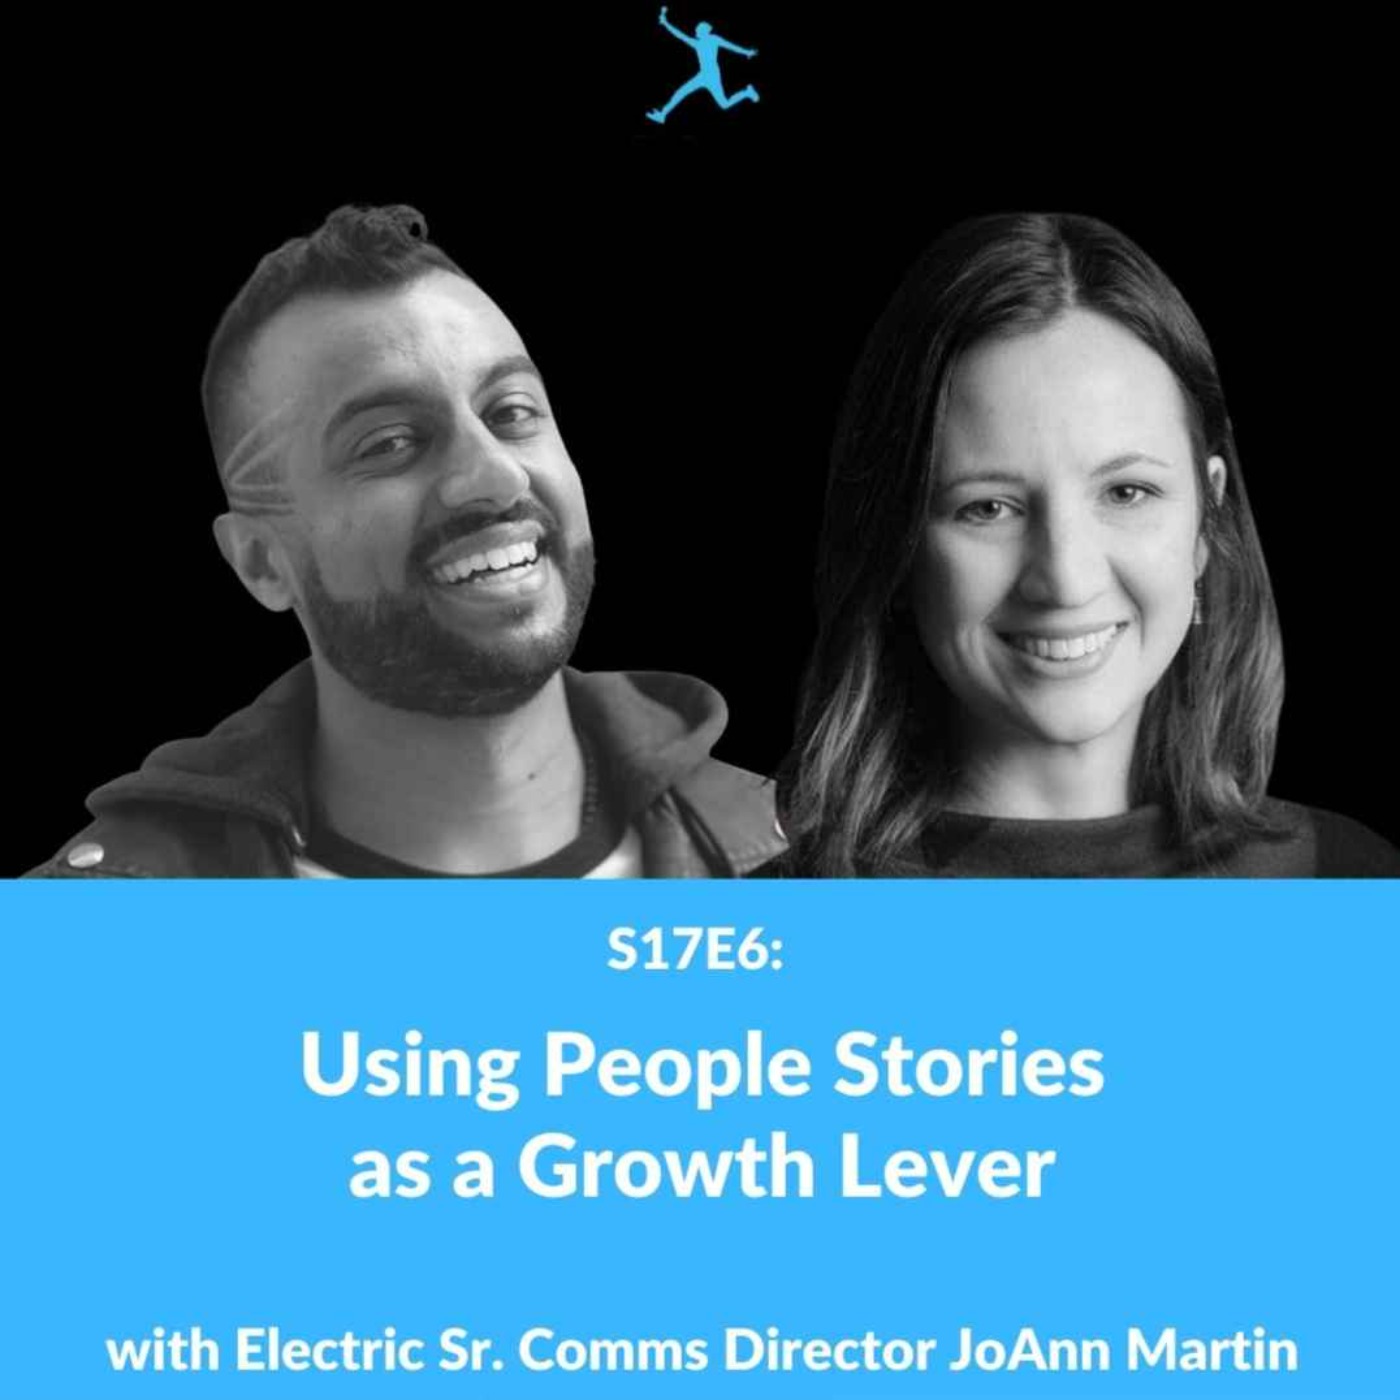 S17E6: Using People Stories as a Growth Lever with Electric Sr. Comms Director JoAnn Martin